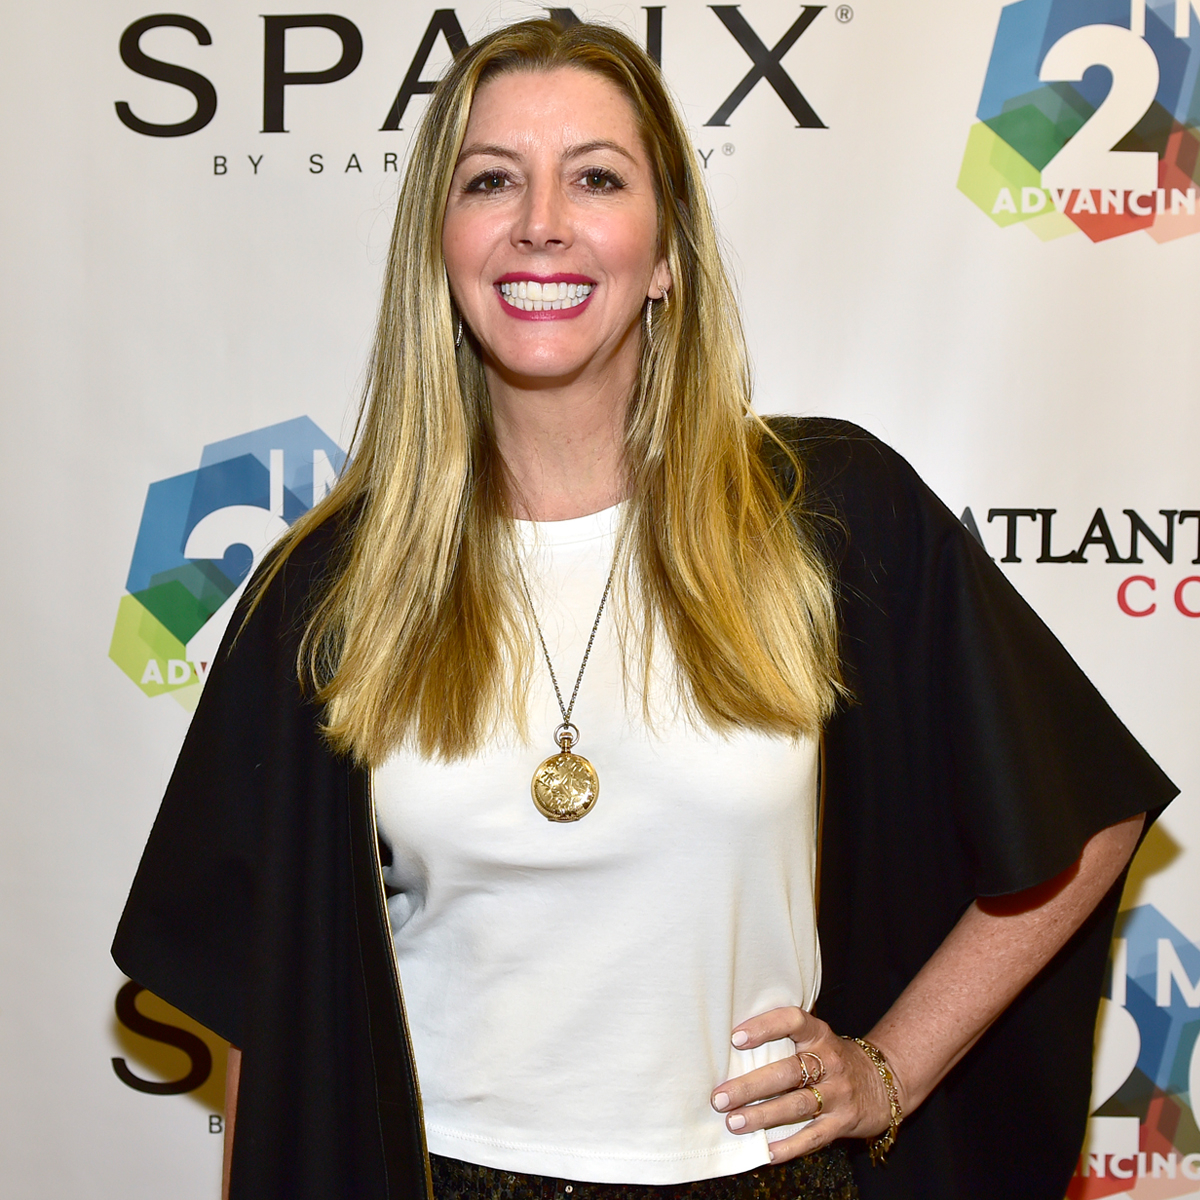 Spanx's Sara Blakely Has Advice You Need to Hear On Valentine's Day